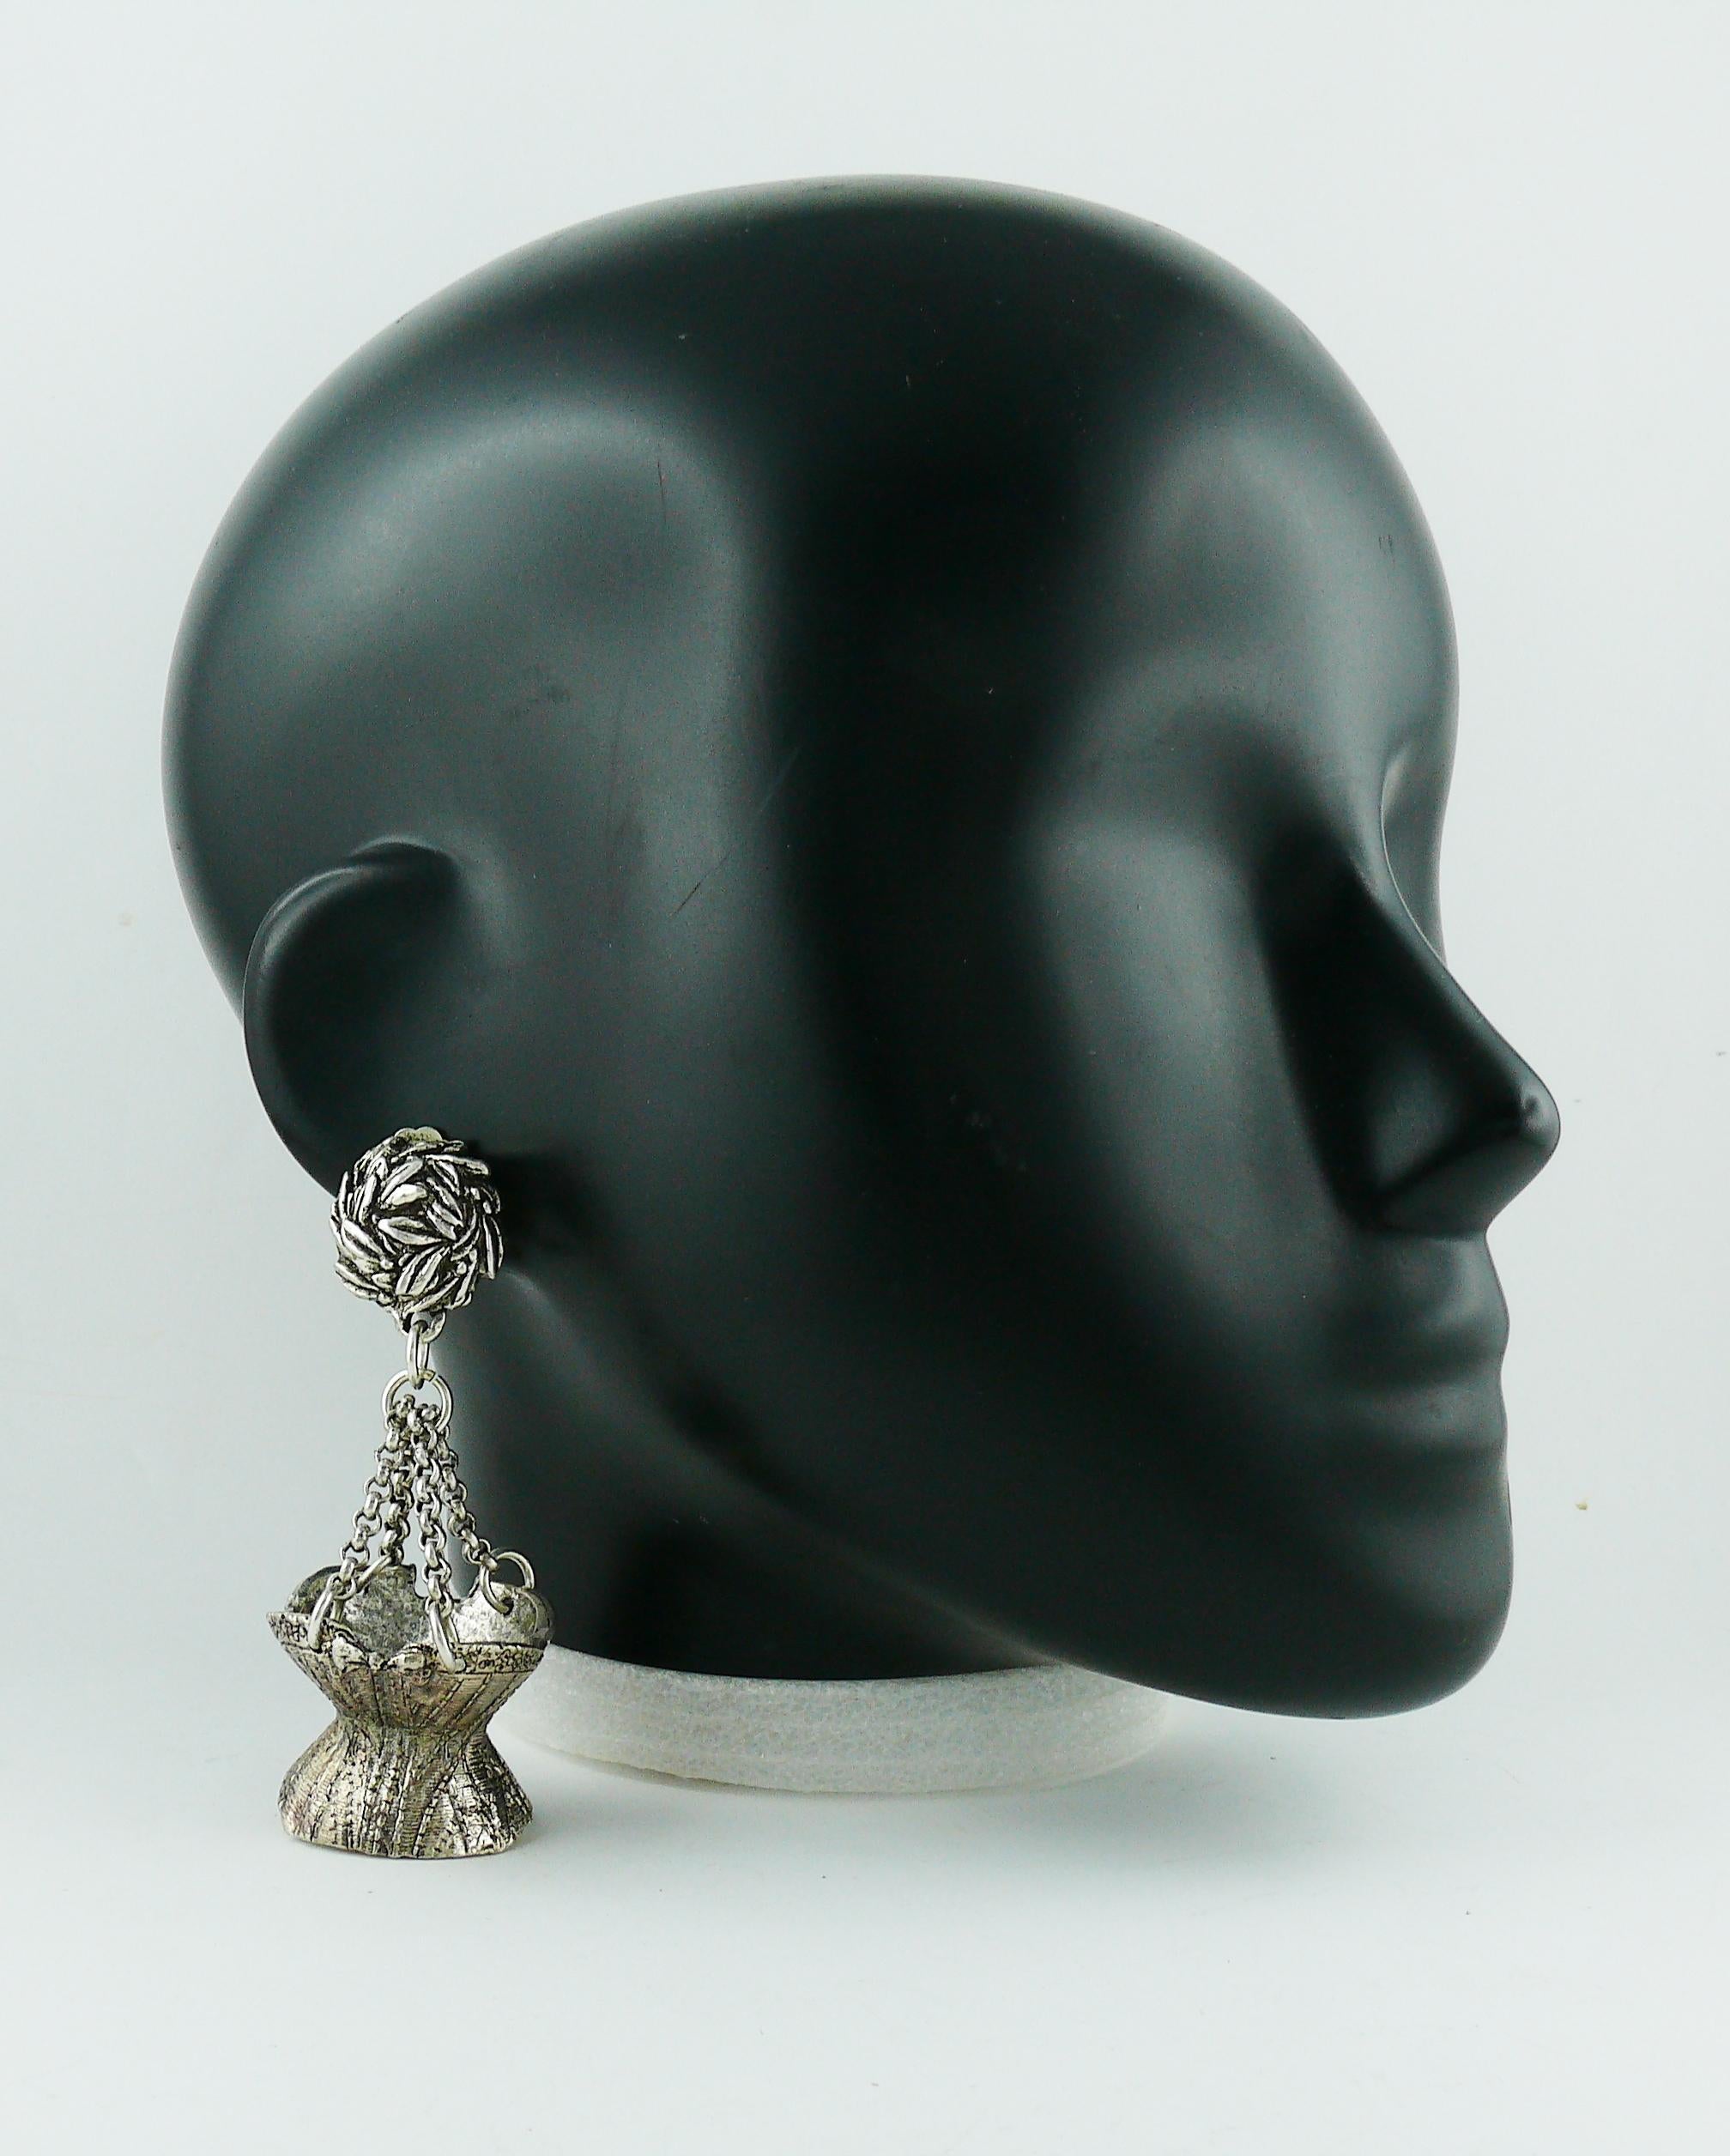 CHANTAL THOMASS vintage rare novelty dangling earrings (clip-on) featuring silver toned corsets.

Embossed CHANTAL THOMASS.

Indicative measurements : height approx. 8.2 cm (3.23 inches) / max. width 3.4 cm (1.34 inches).

JEWELRY CONDITION CHART
-